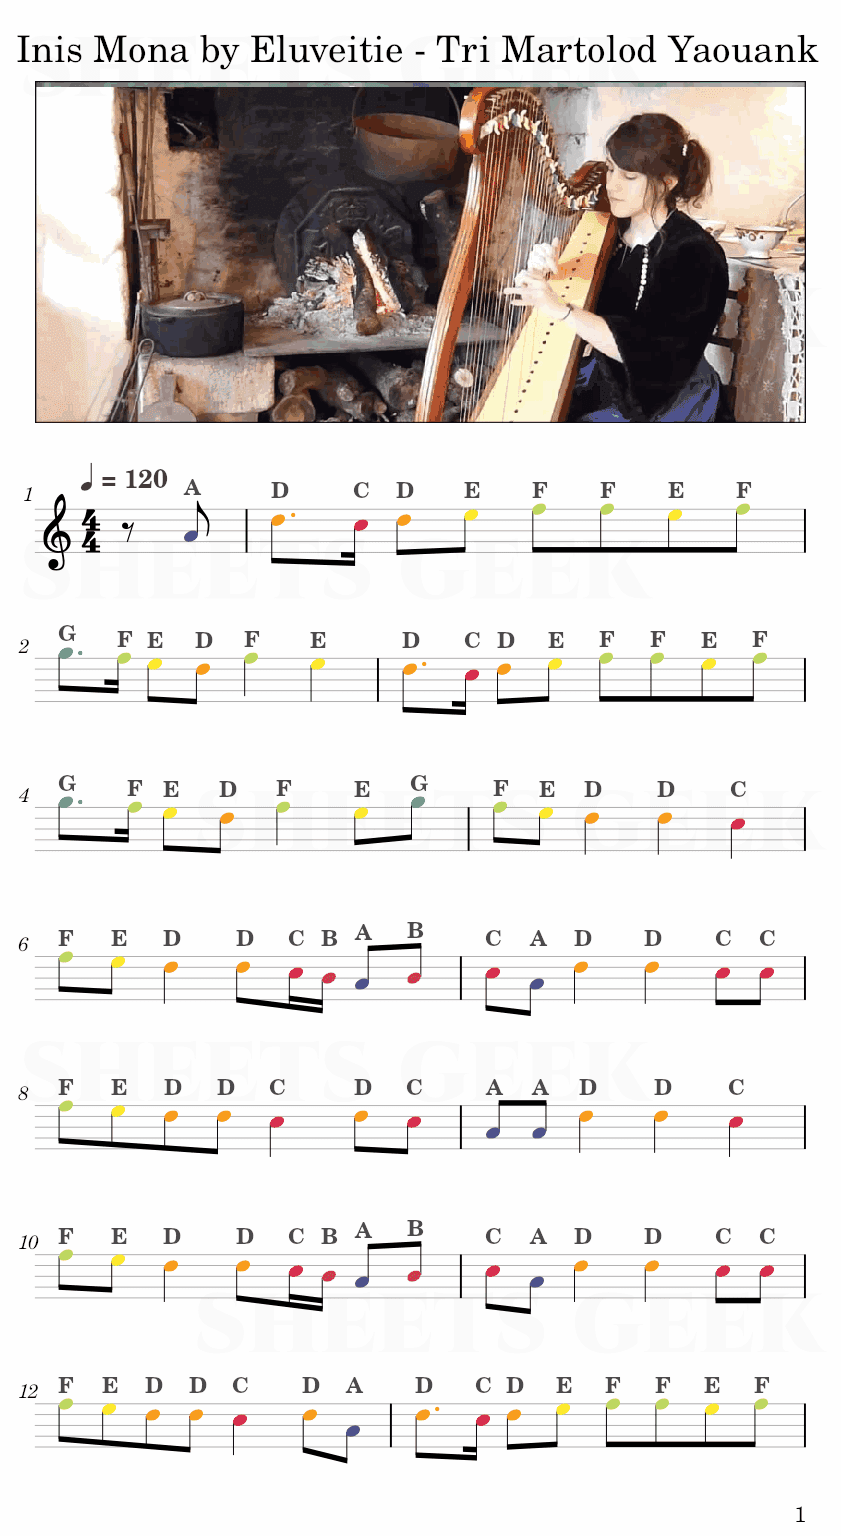 Inis Mona by Eluveitie - Tri Martolod Yaouank Easy Sheet Music Free for piano, keyboard, flute, violin, sax, cello page 1